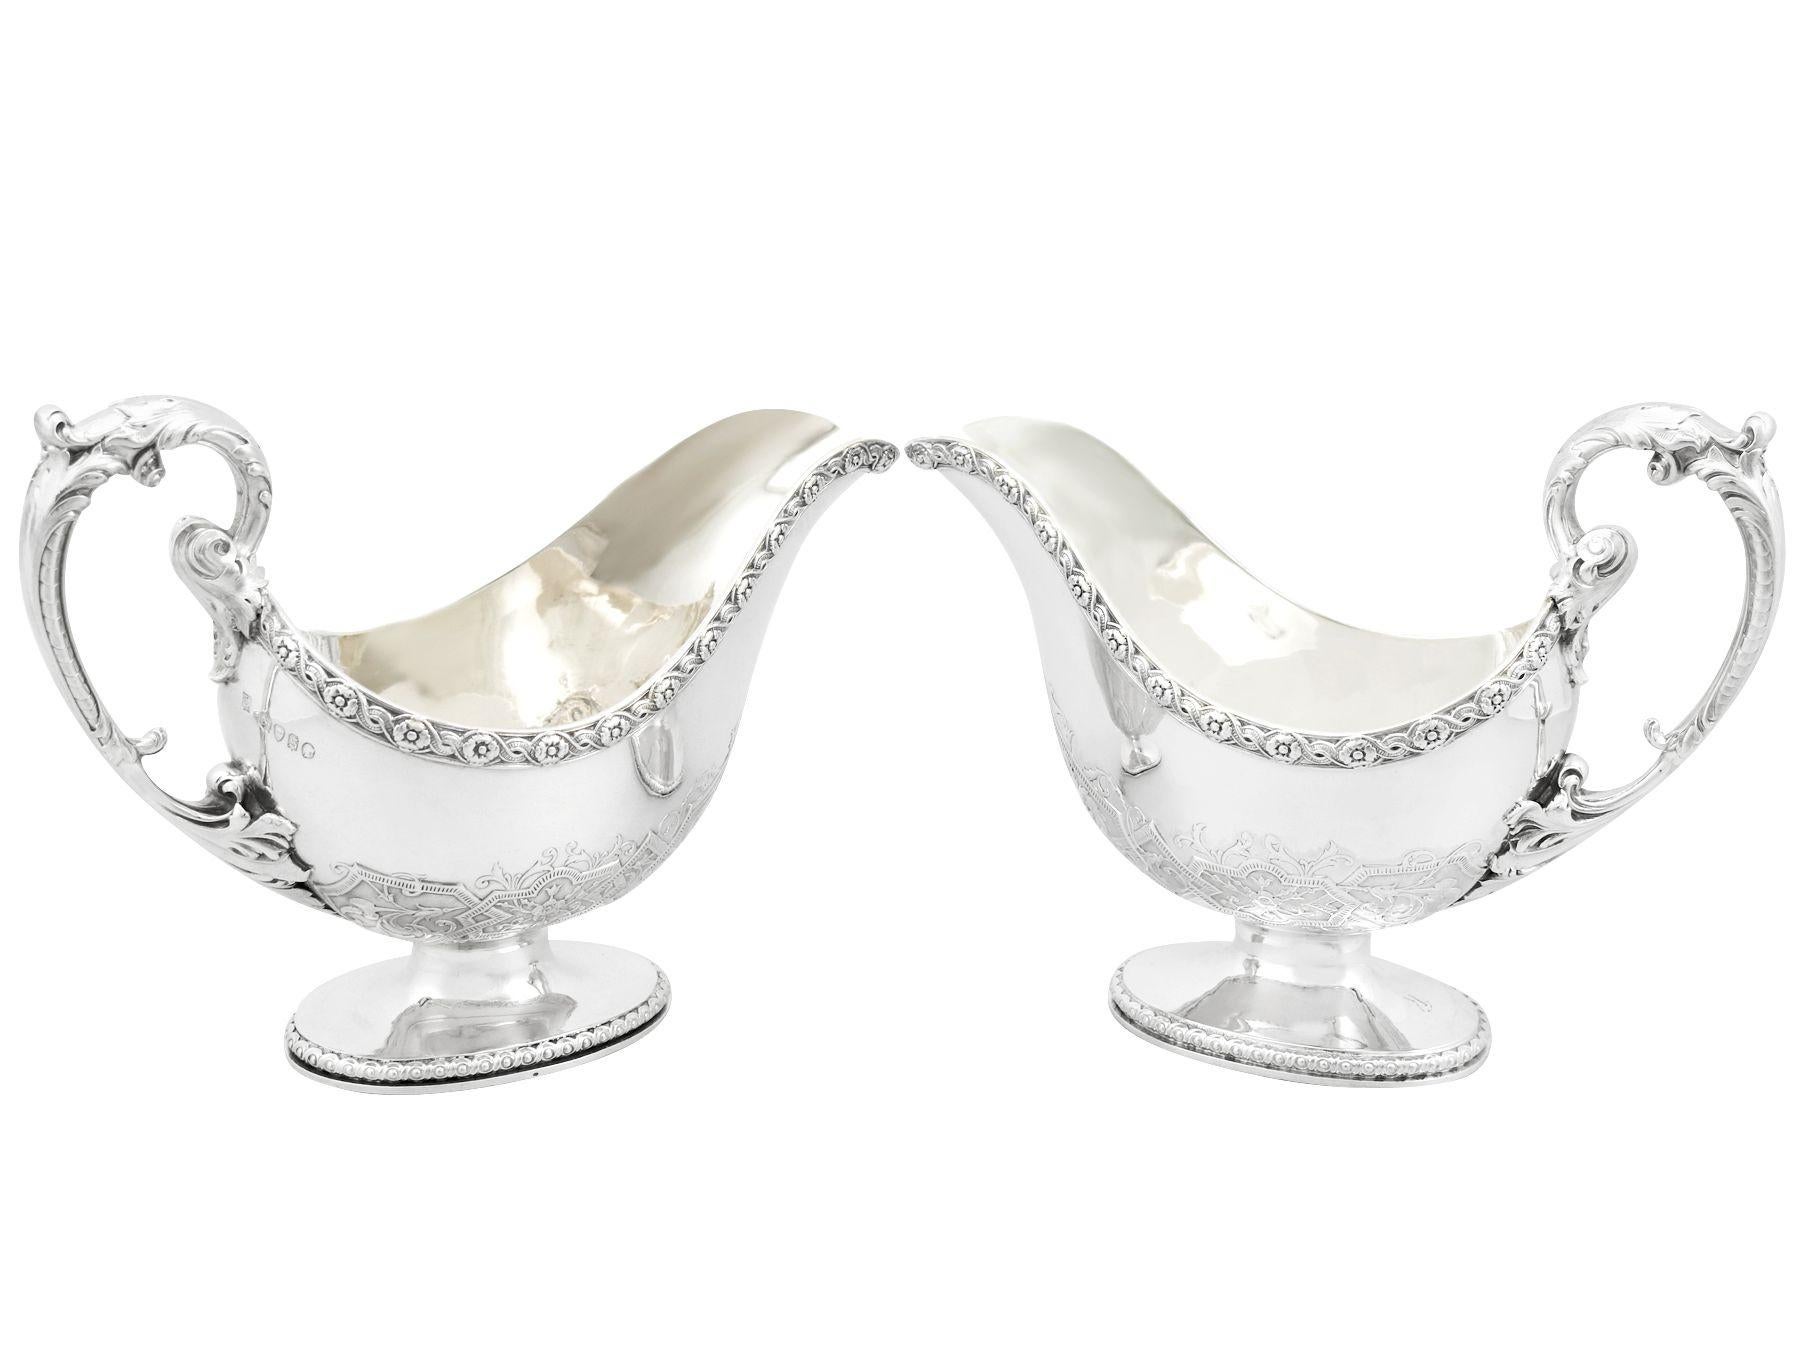 A magnificent, fine and impressive pair of antique Victorian sterling silver sauceboats, an addition to our dining silverware collection.

These magnificent antique Victorian sterling silver sauce boats have a plain oval rounded form onto an oval